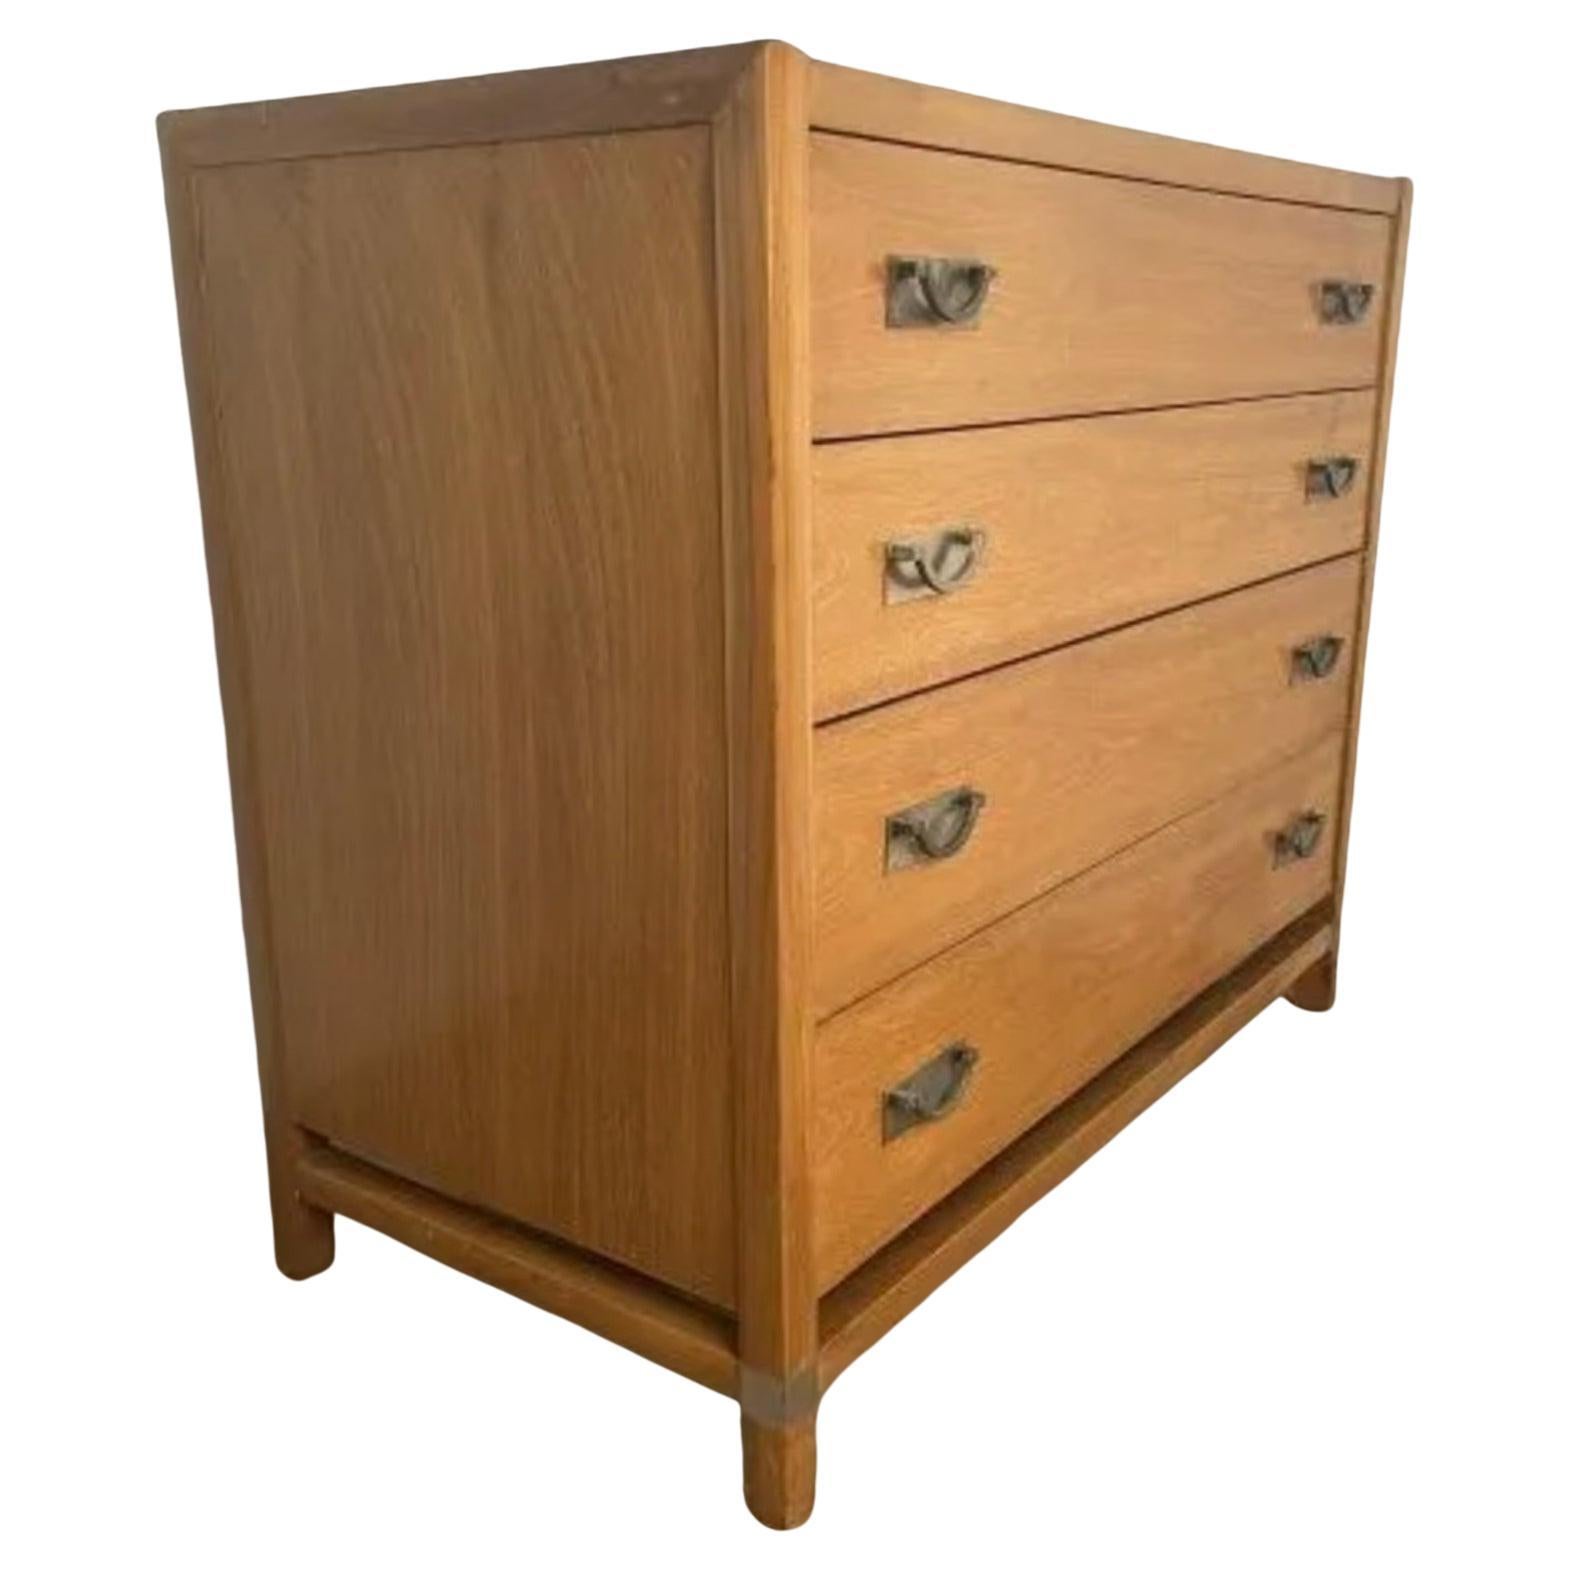 Pair of Walnut Mid Century Modern Dressers with (4) pull out drawers and the original Nickel handles and accents. Great design classic Pull handles all solid wood drawers - high quality construction. Made in USA. Located in Brooklyn NYC. 

Sold as a